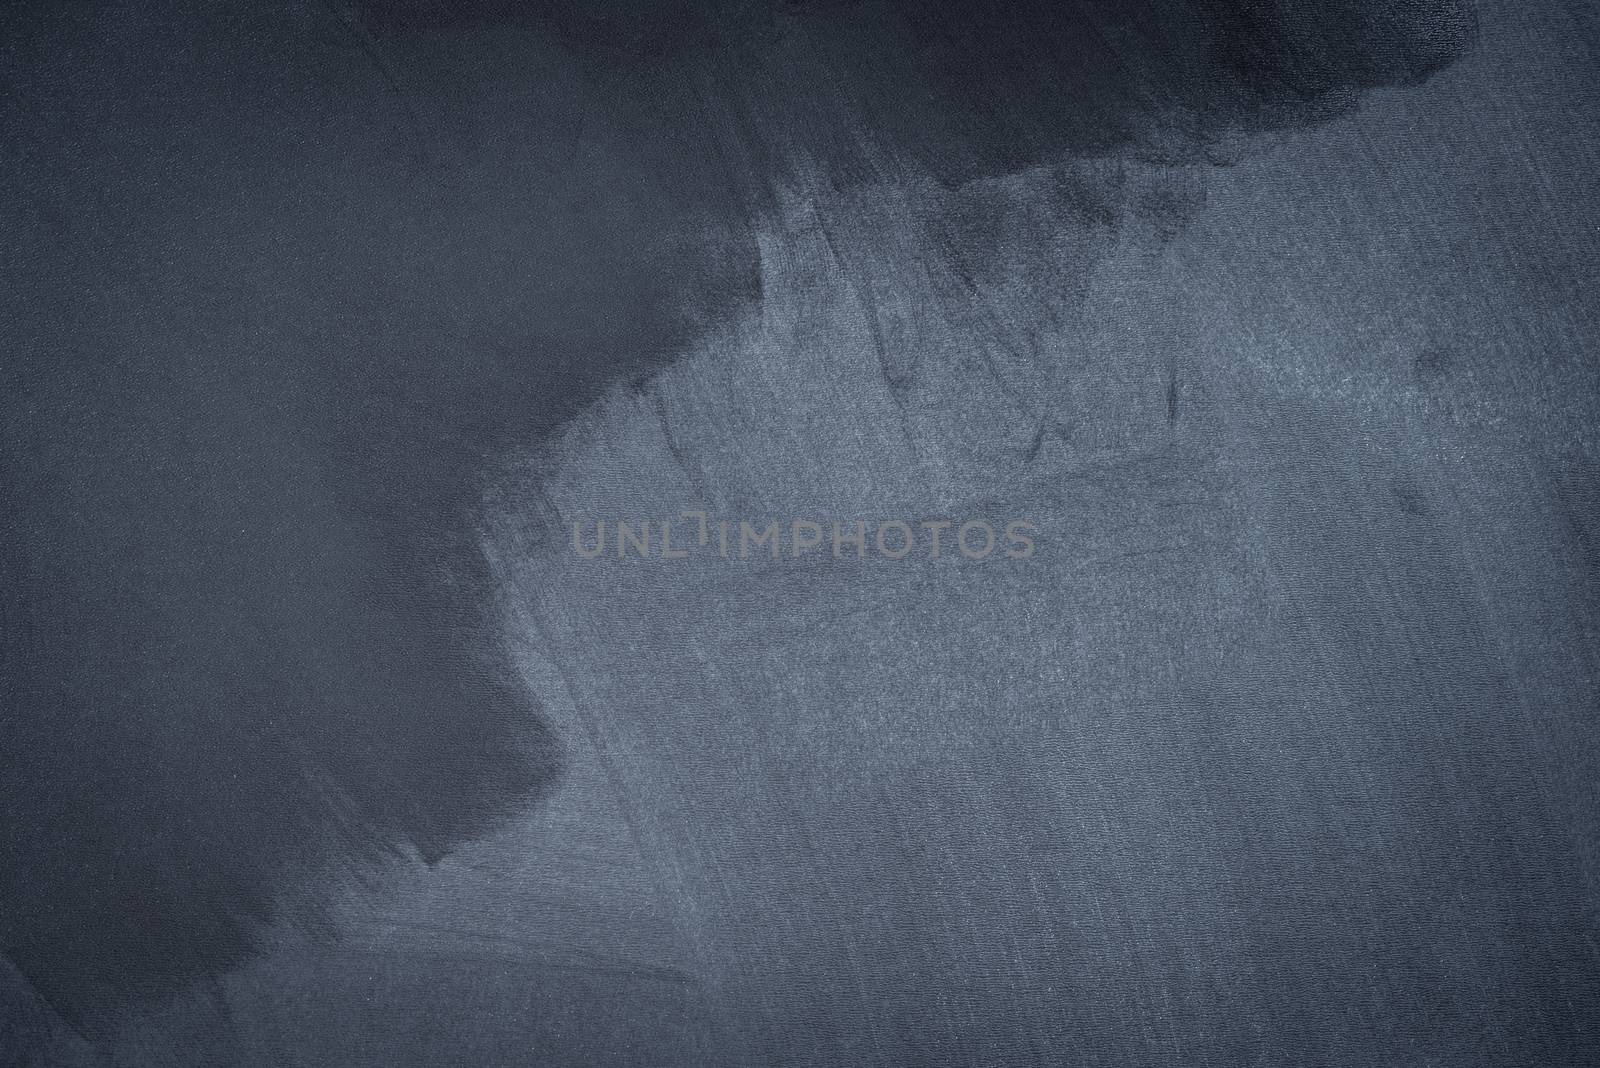 abstract black dirty chalkboard for background